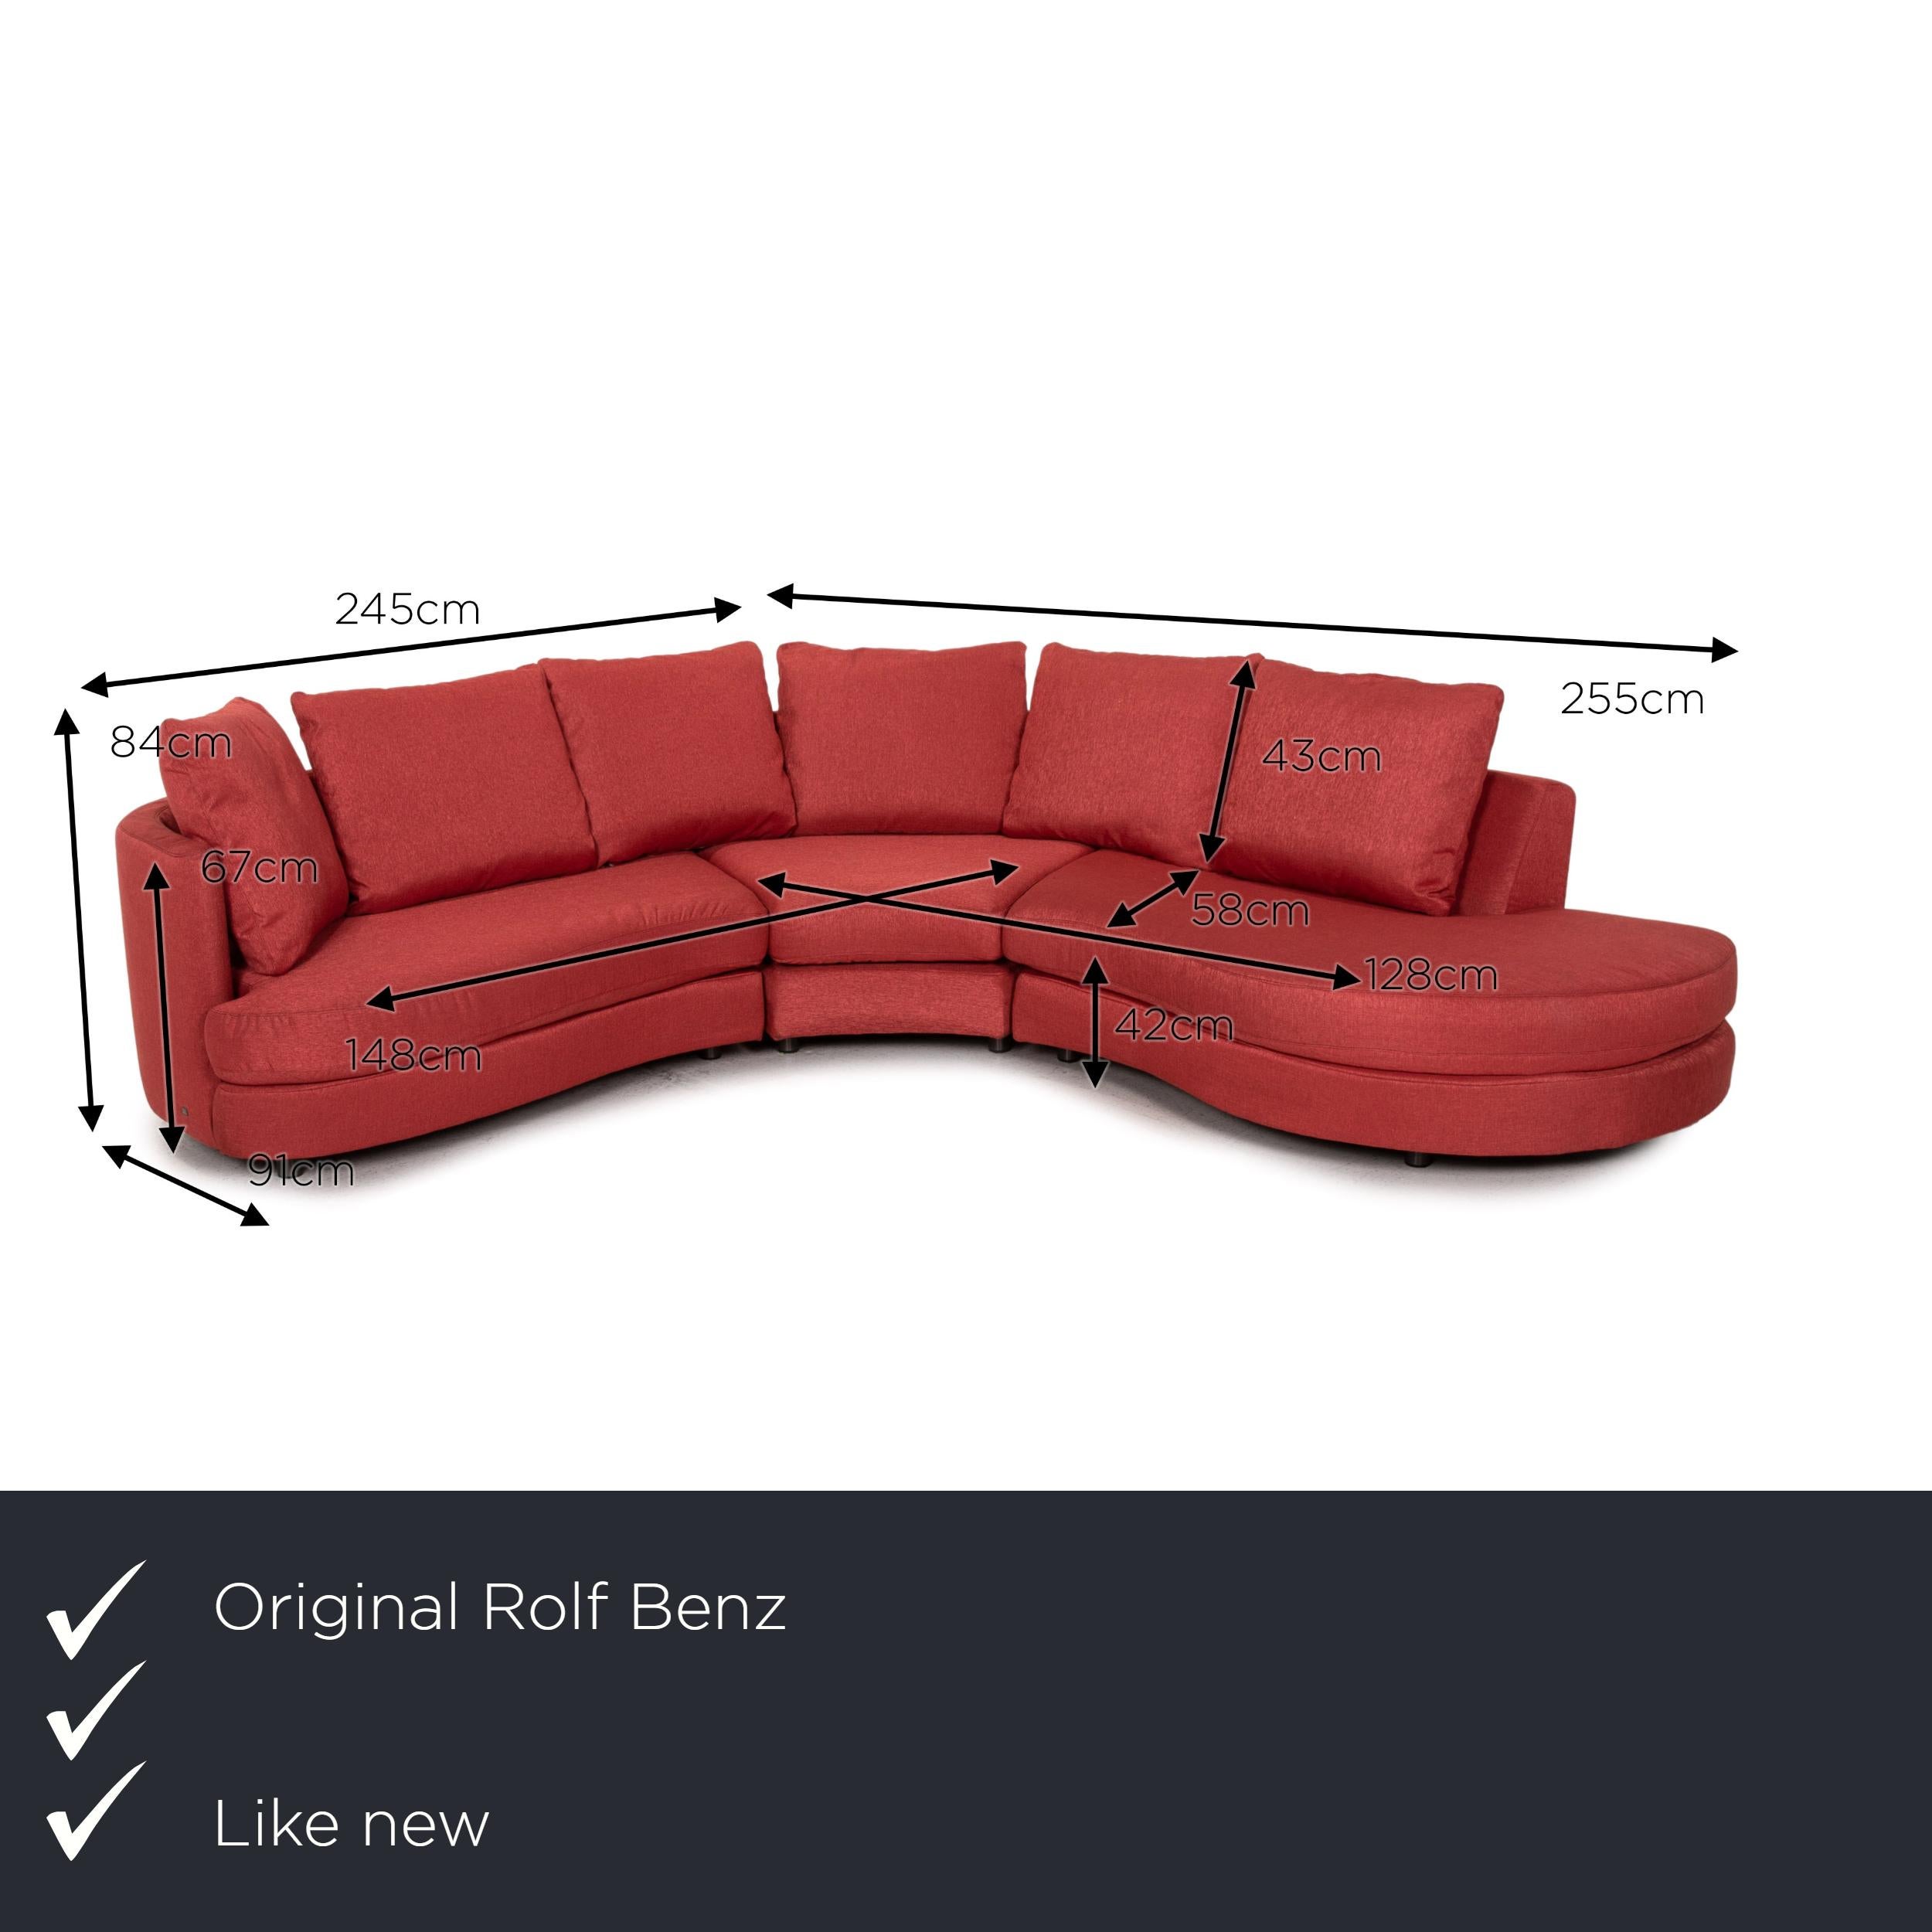 We present to you a Rolf Benz fabric corner sofa red sofa couch.

Product measurements in centimeters:

Depth 91
Width 245
Height 84
Seat height 42
Rest height 67
Seat depth 58
Seat width 148
Back height 43.
 
  
  